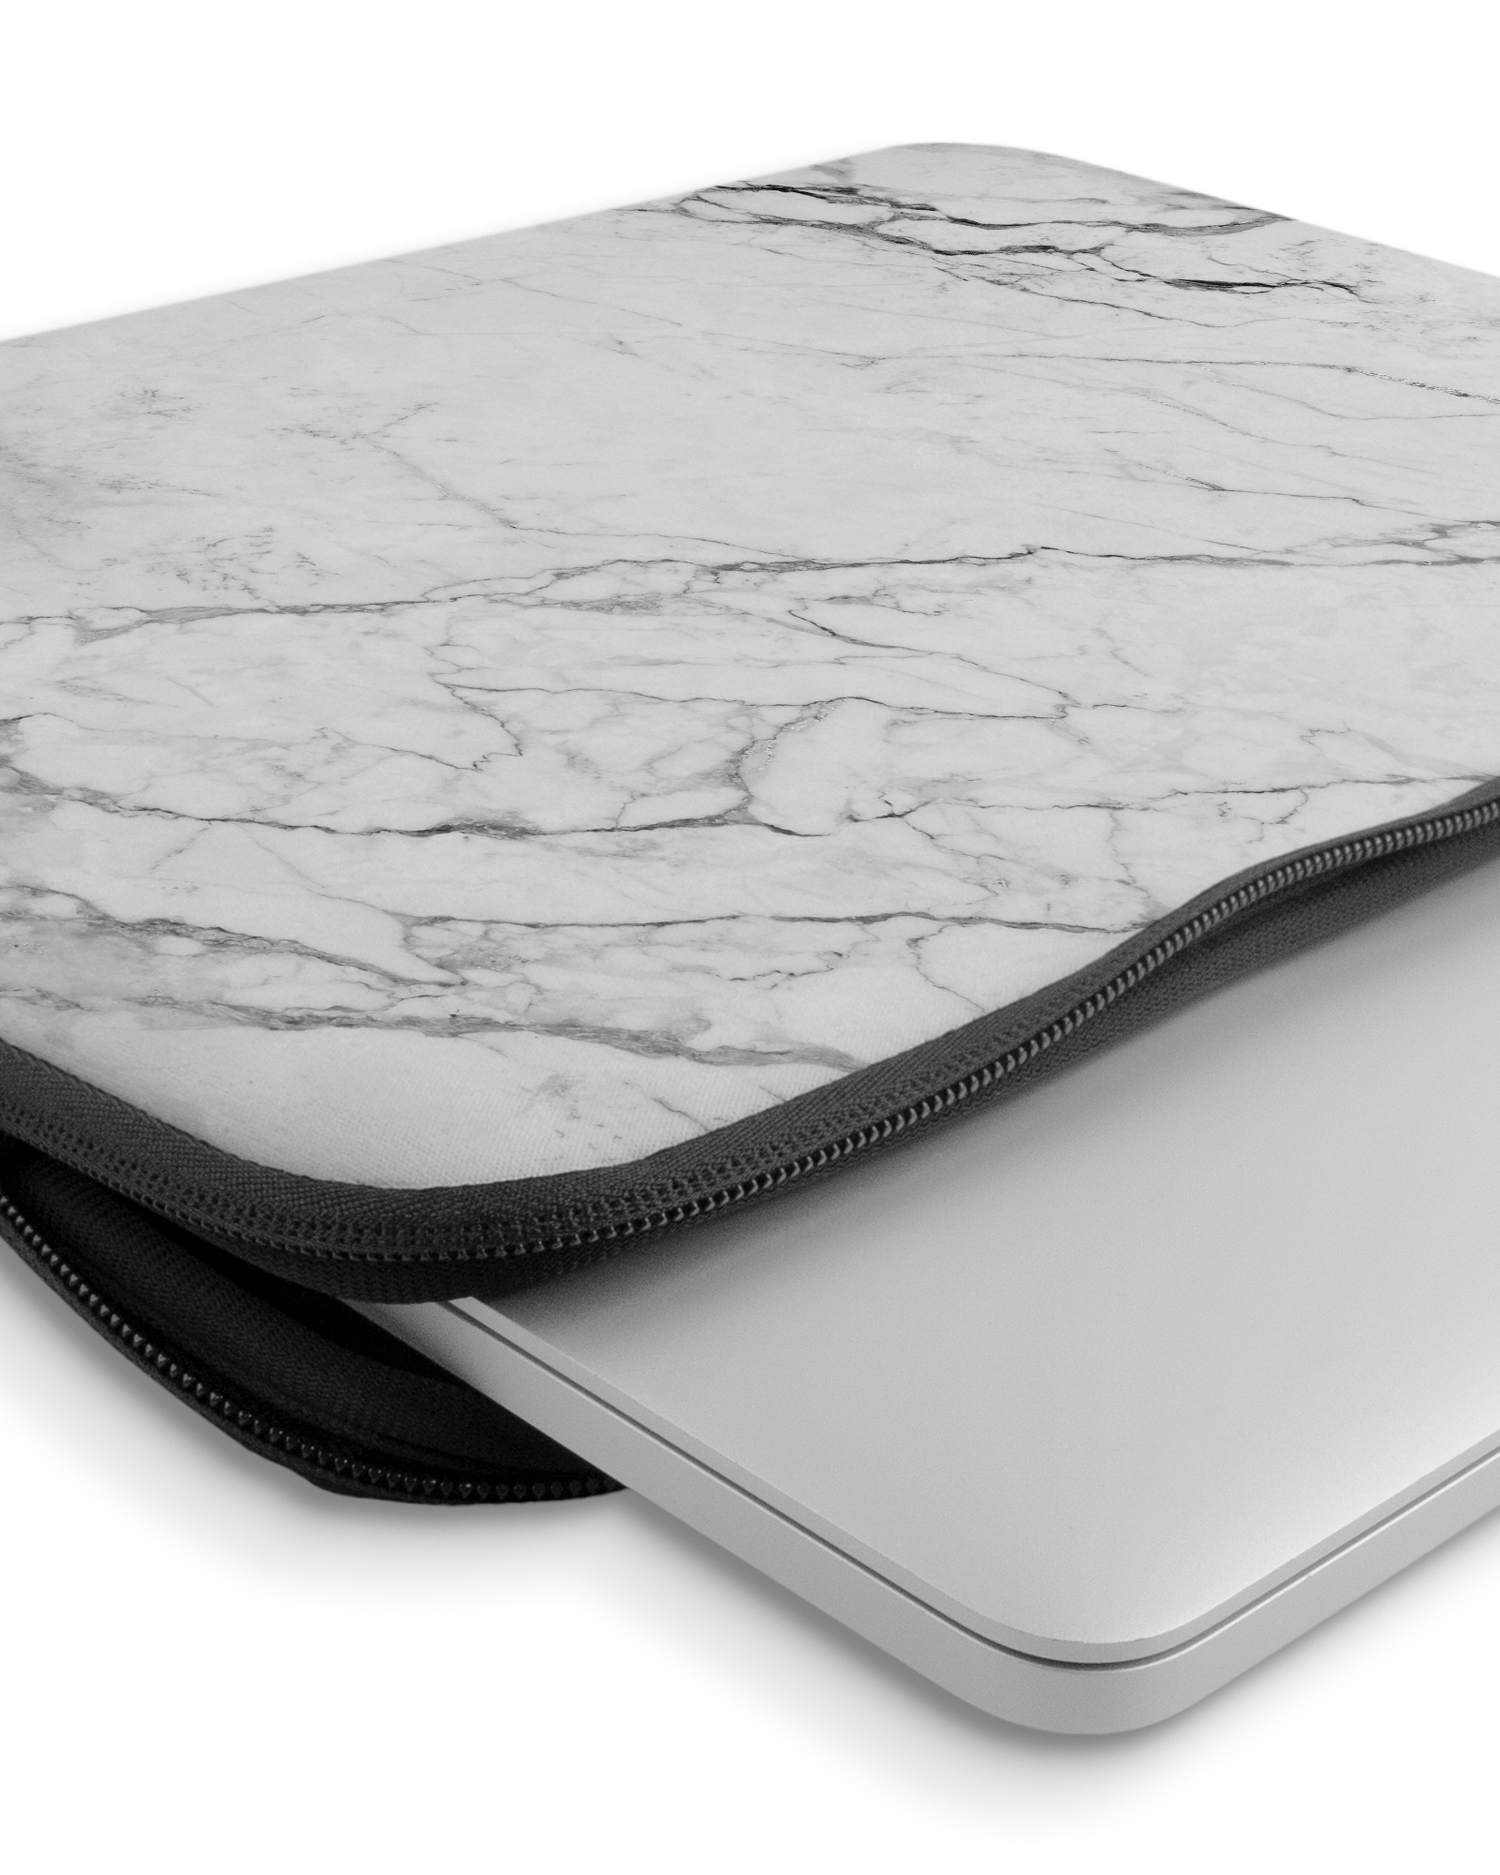 White Marble Laptop Case 14-15 inch with device inside